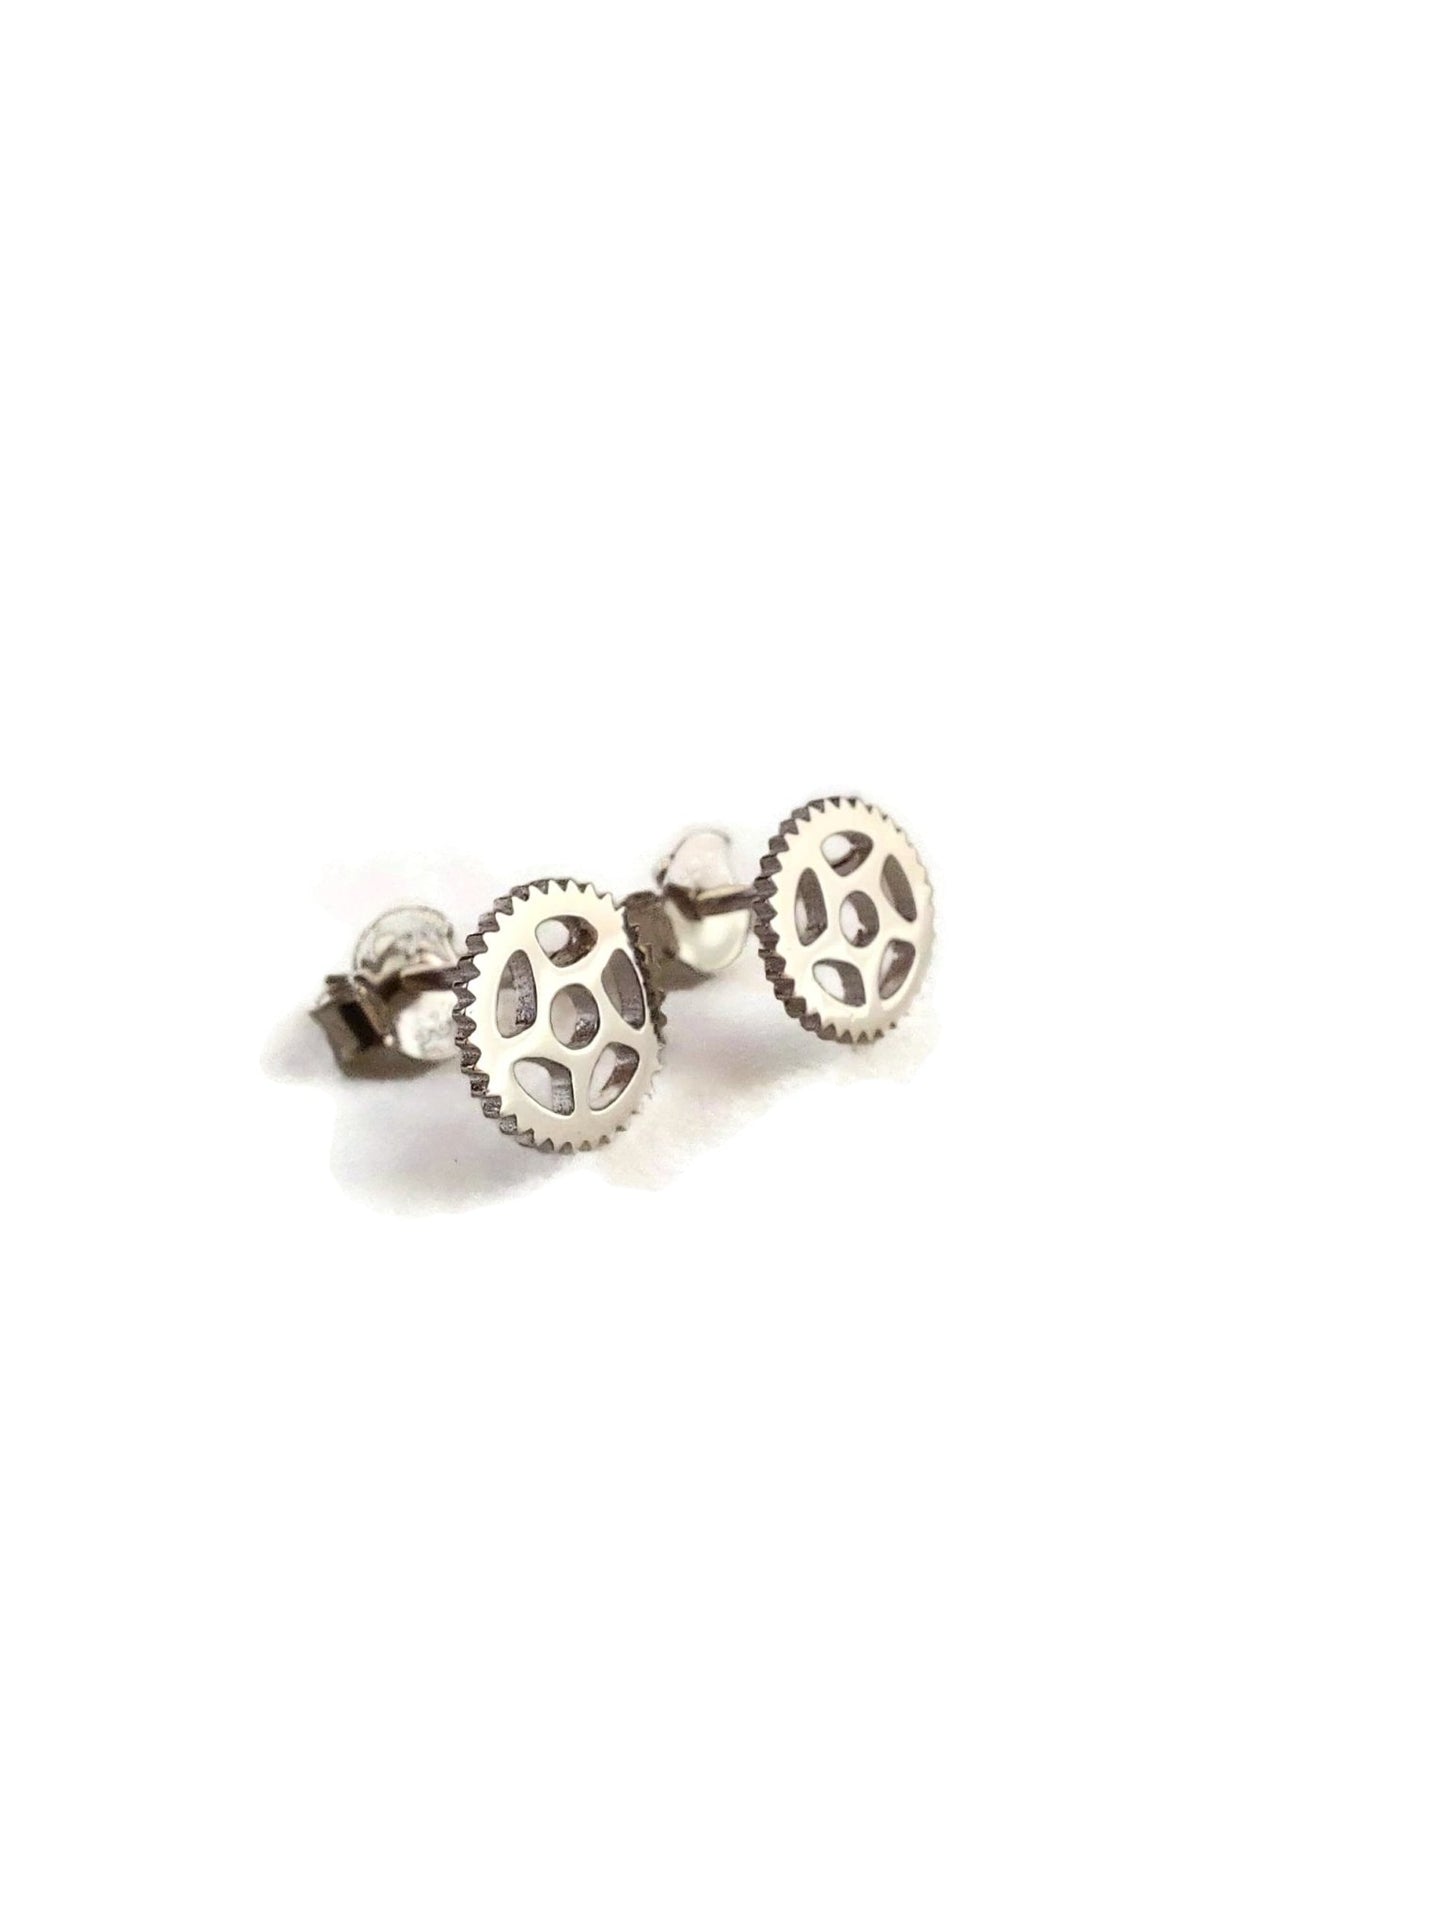 Rhodium Plated sterling silver bike chain ring sprocket stud earrings with white background